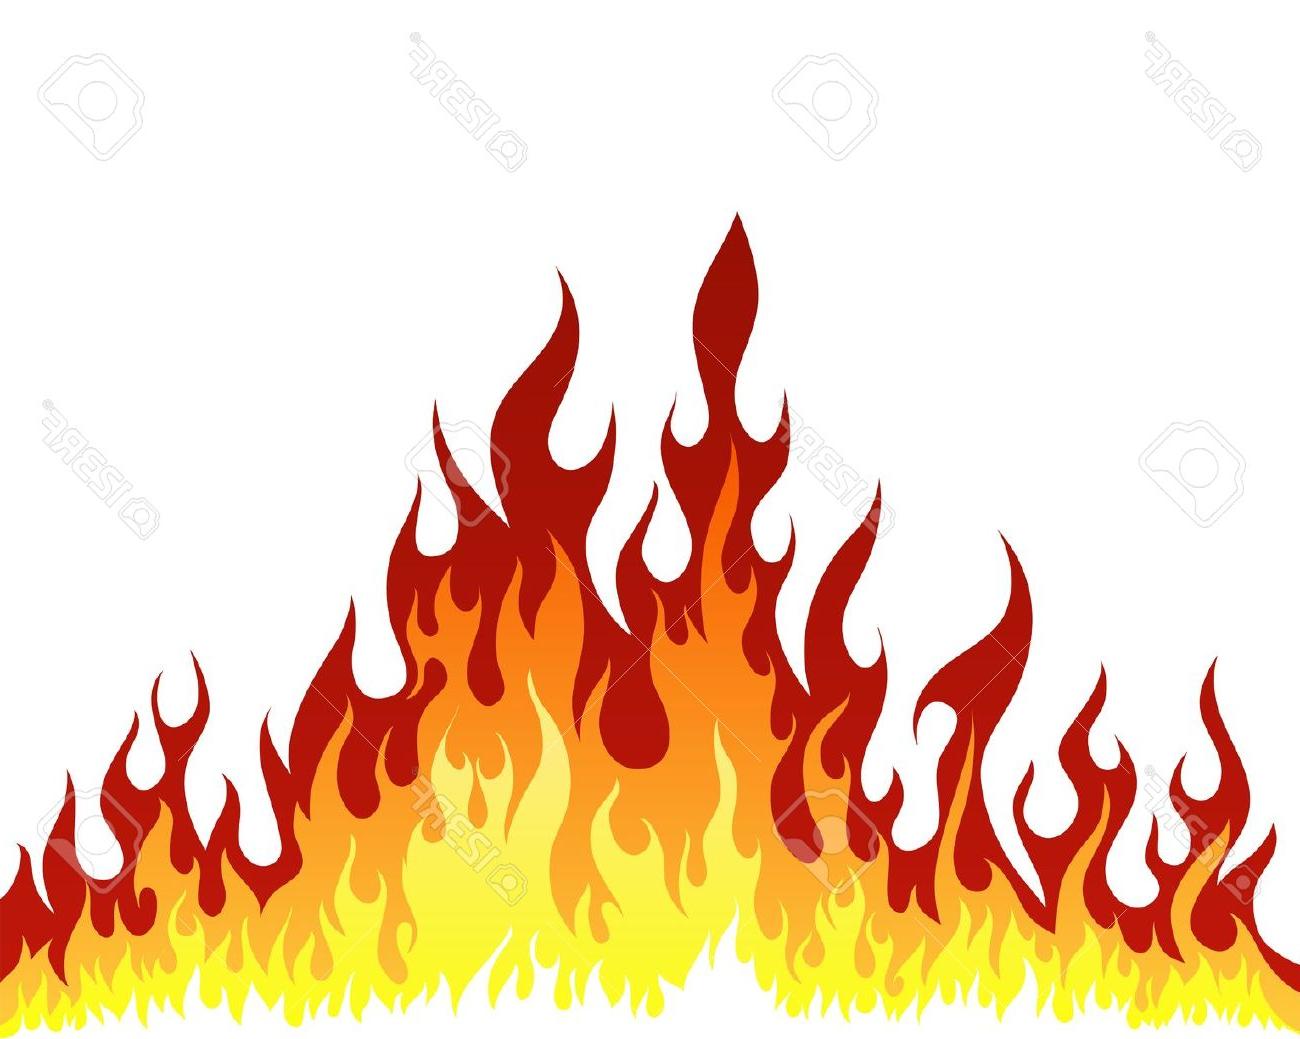 Flames Background Clipart.